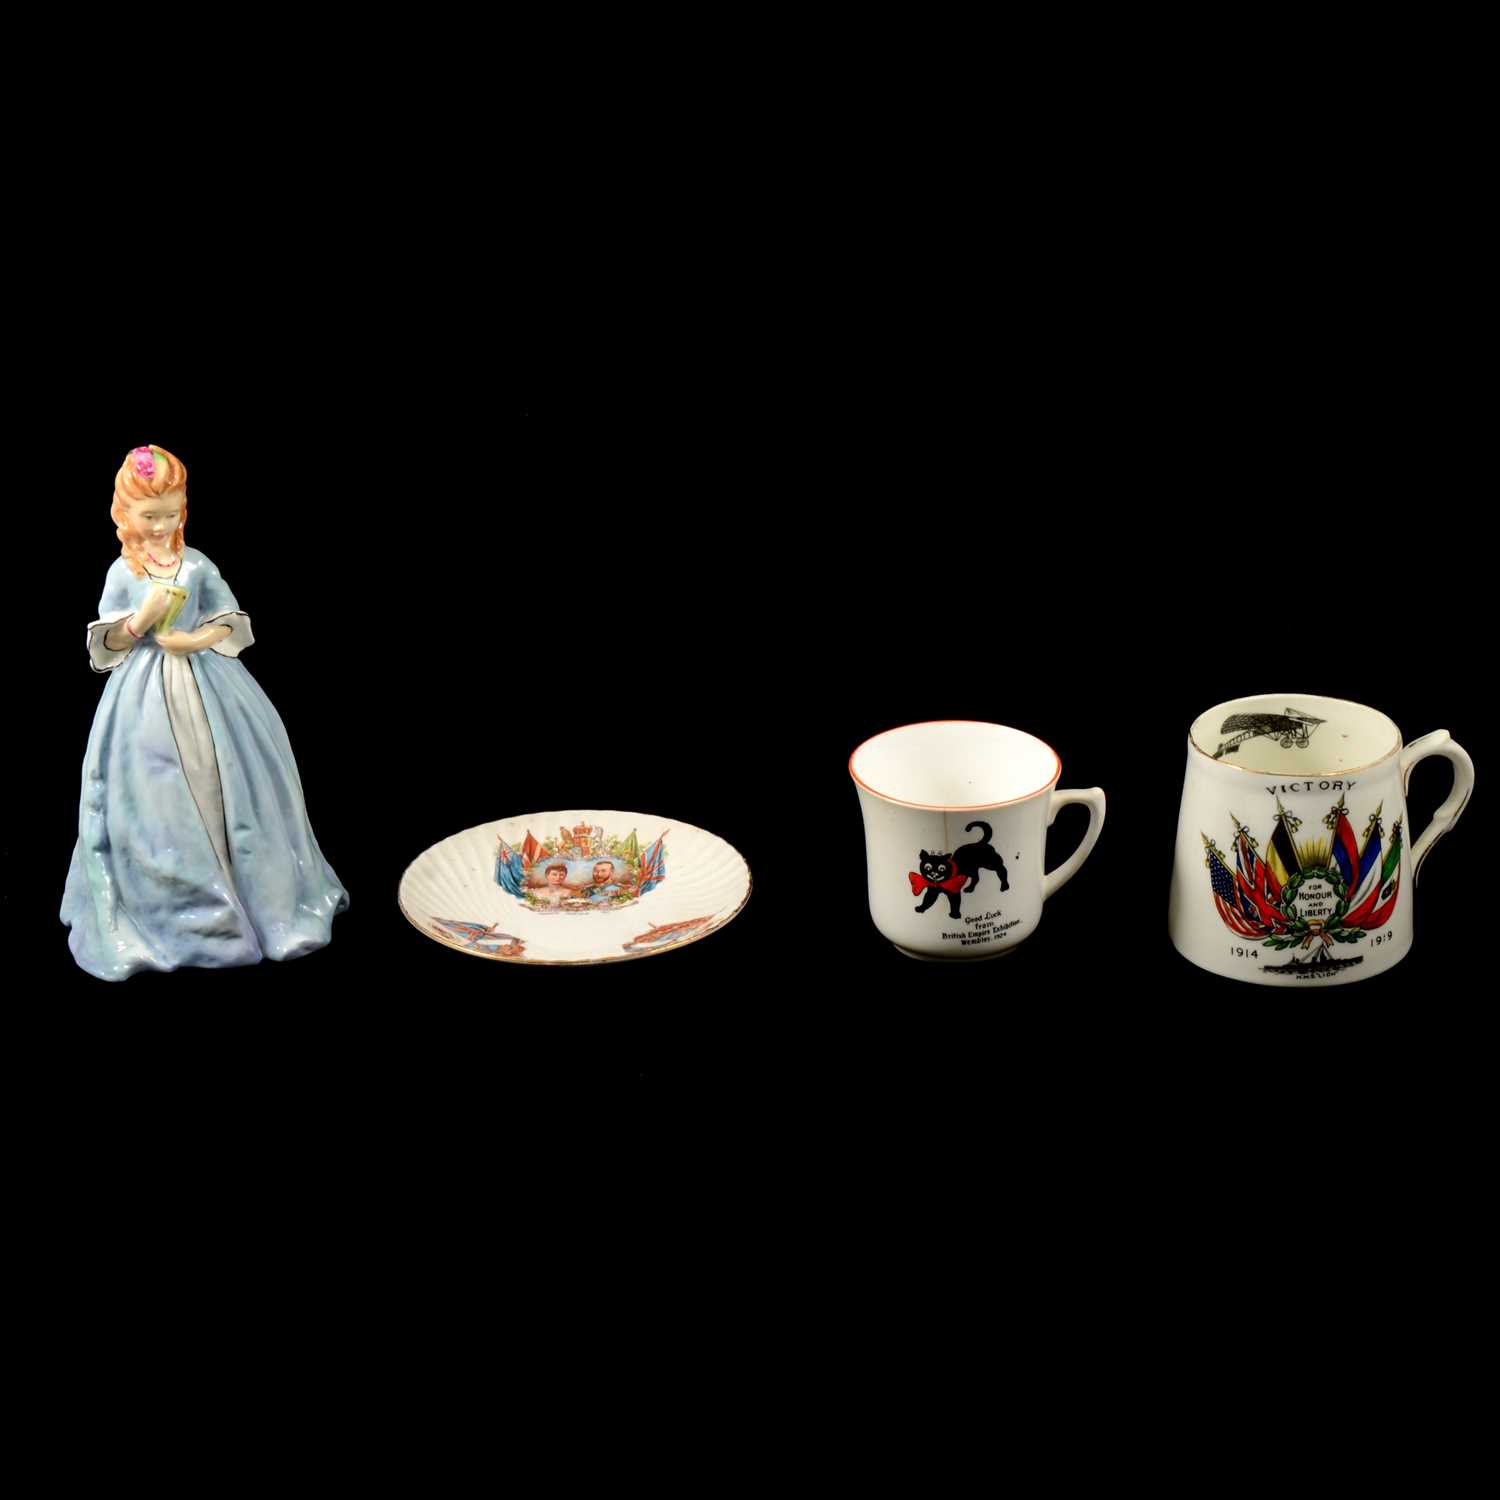 Lot 67 - WW1 Victory mug, commemorative cup, commemorative saucer, and a Royal Worcester figurine.